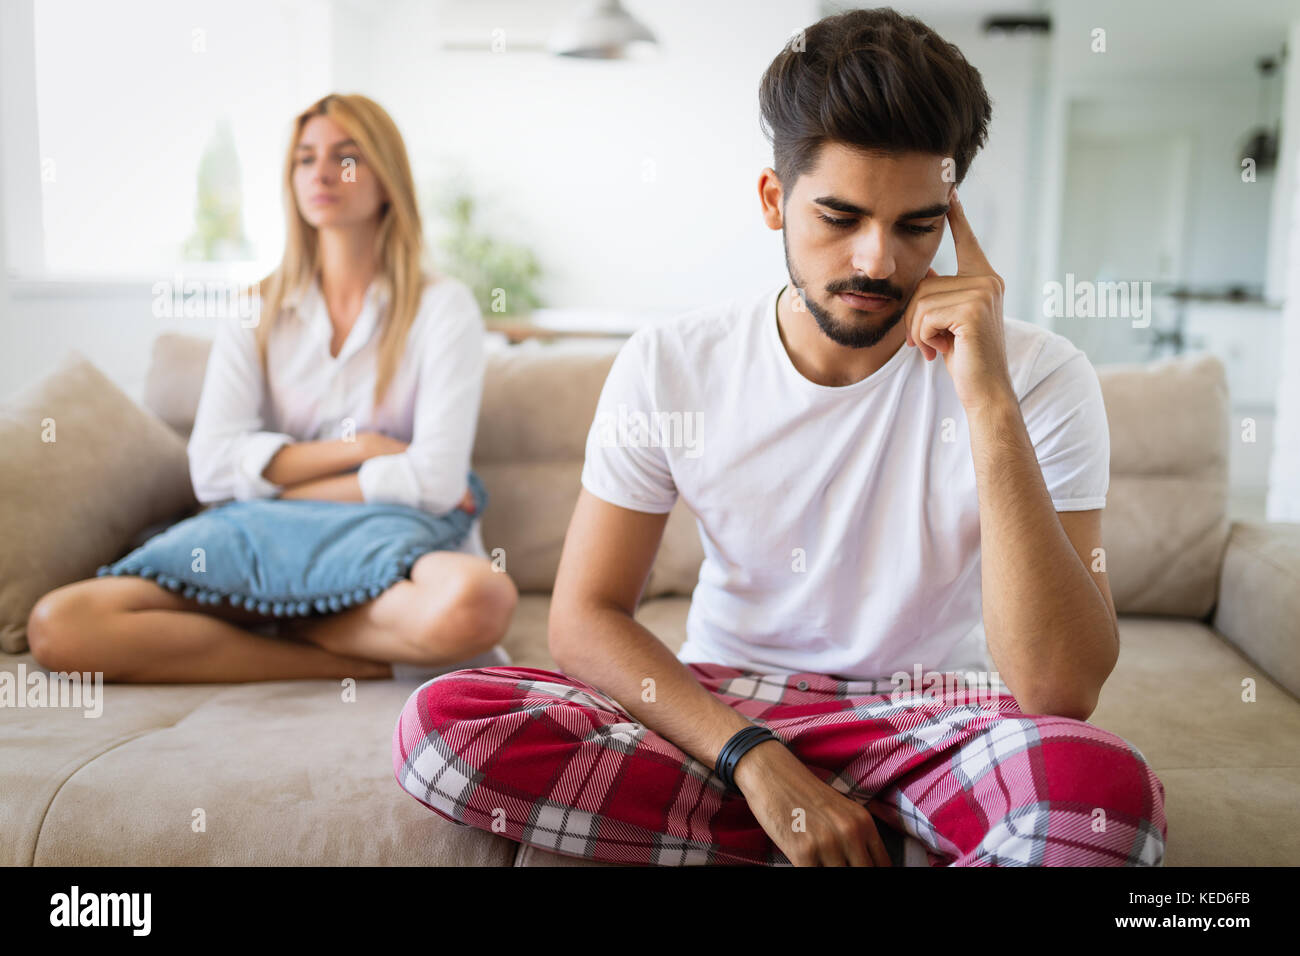 Unhappy couple having crisis and difficulties in relationship Stock Photo